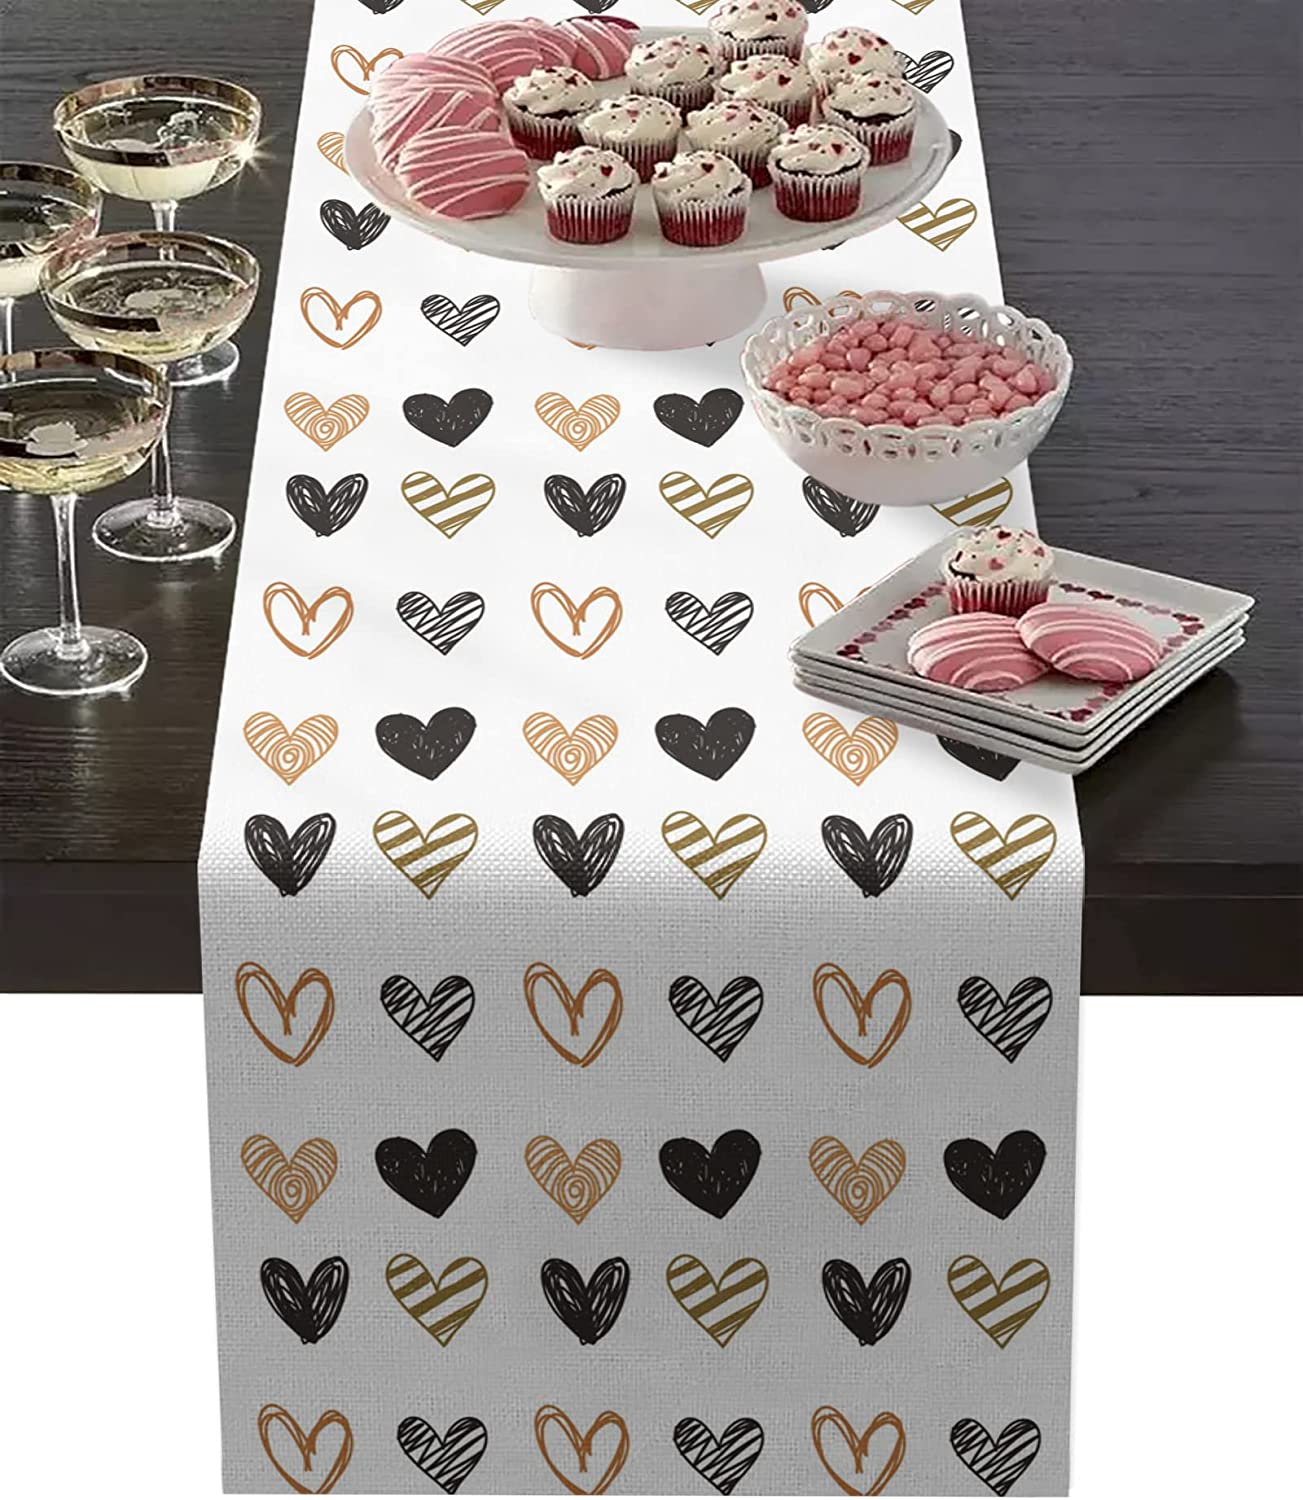 Simple Heart Shapes - Love Heart Table Runner For Valentine's Day